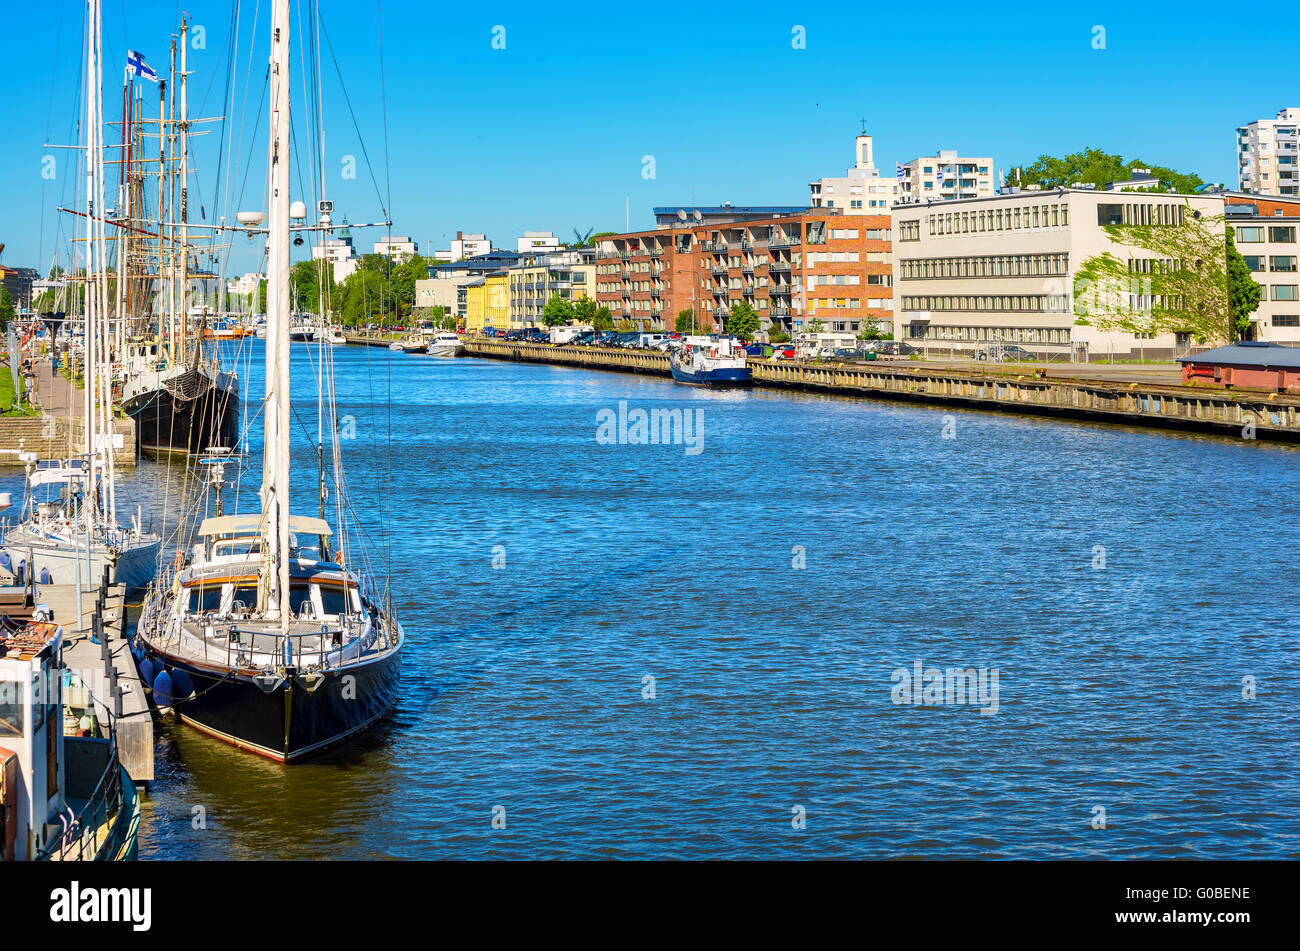 View of the River Aura in Turku (Abo). Finland, Europe Stock Photo